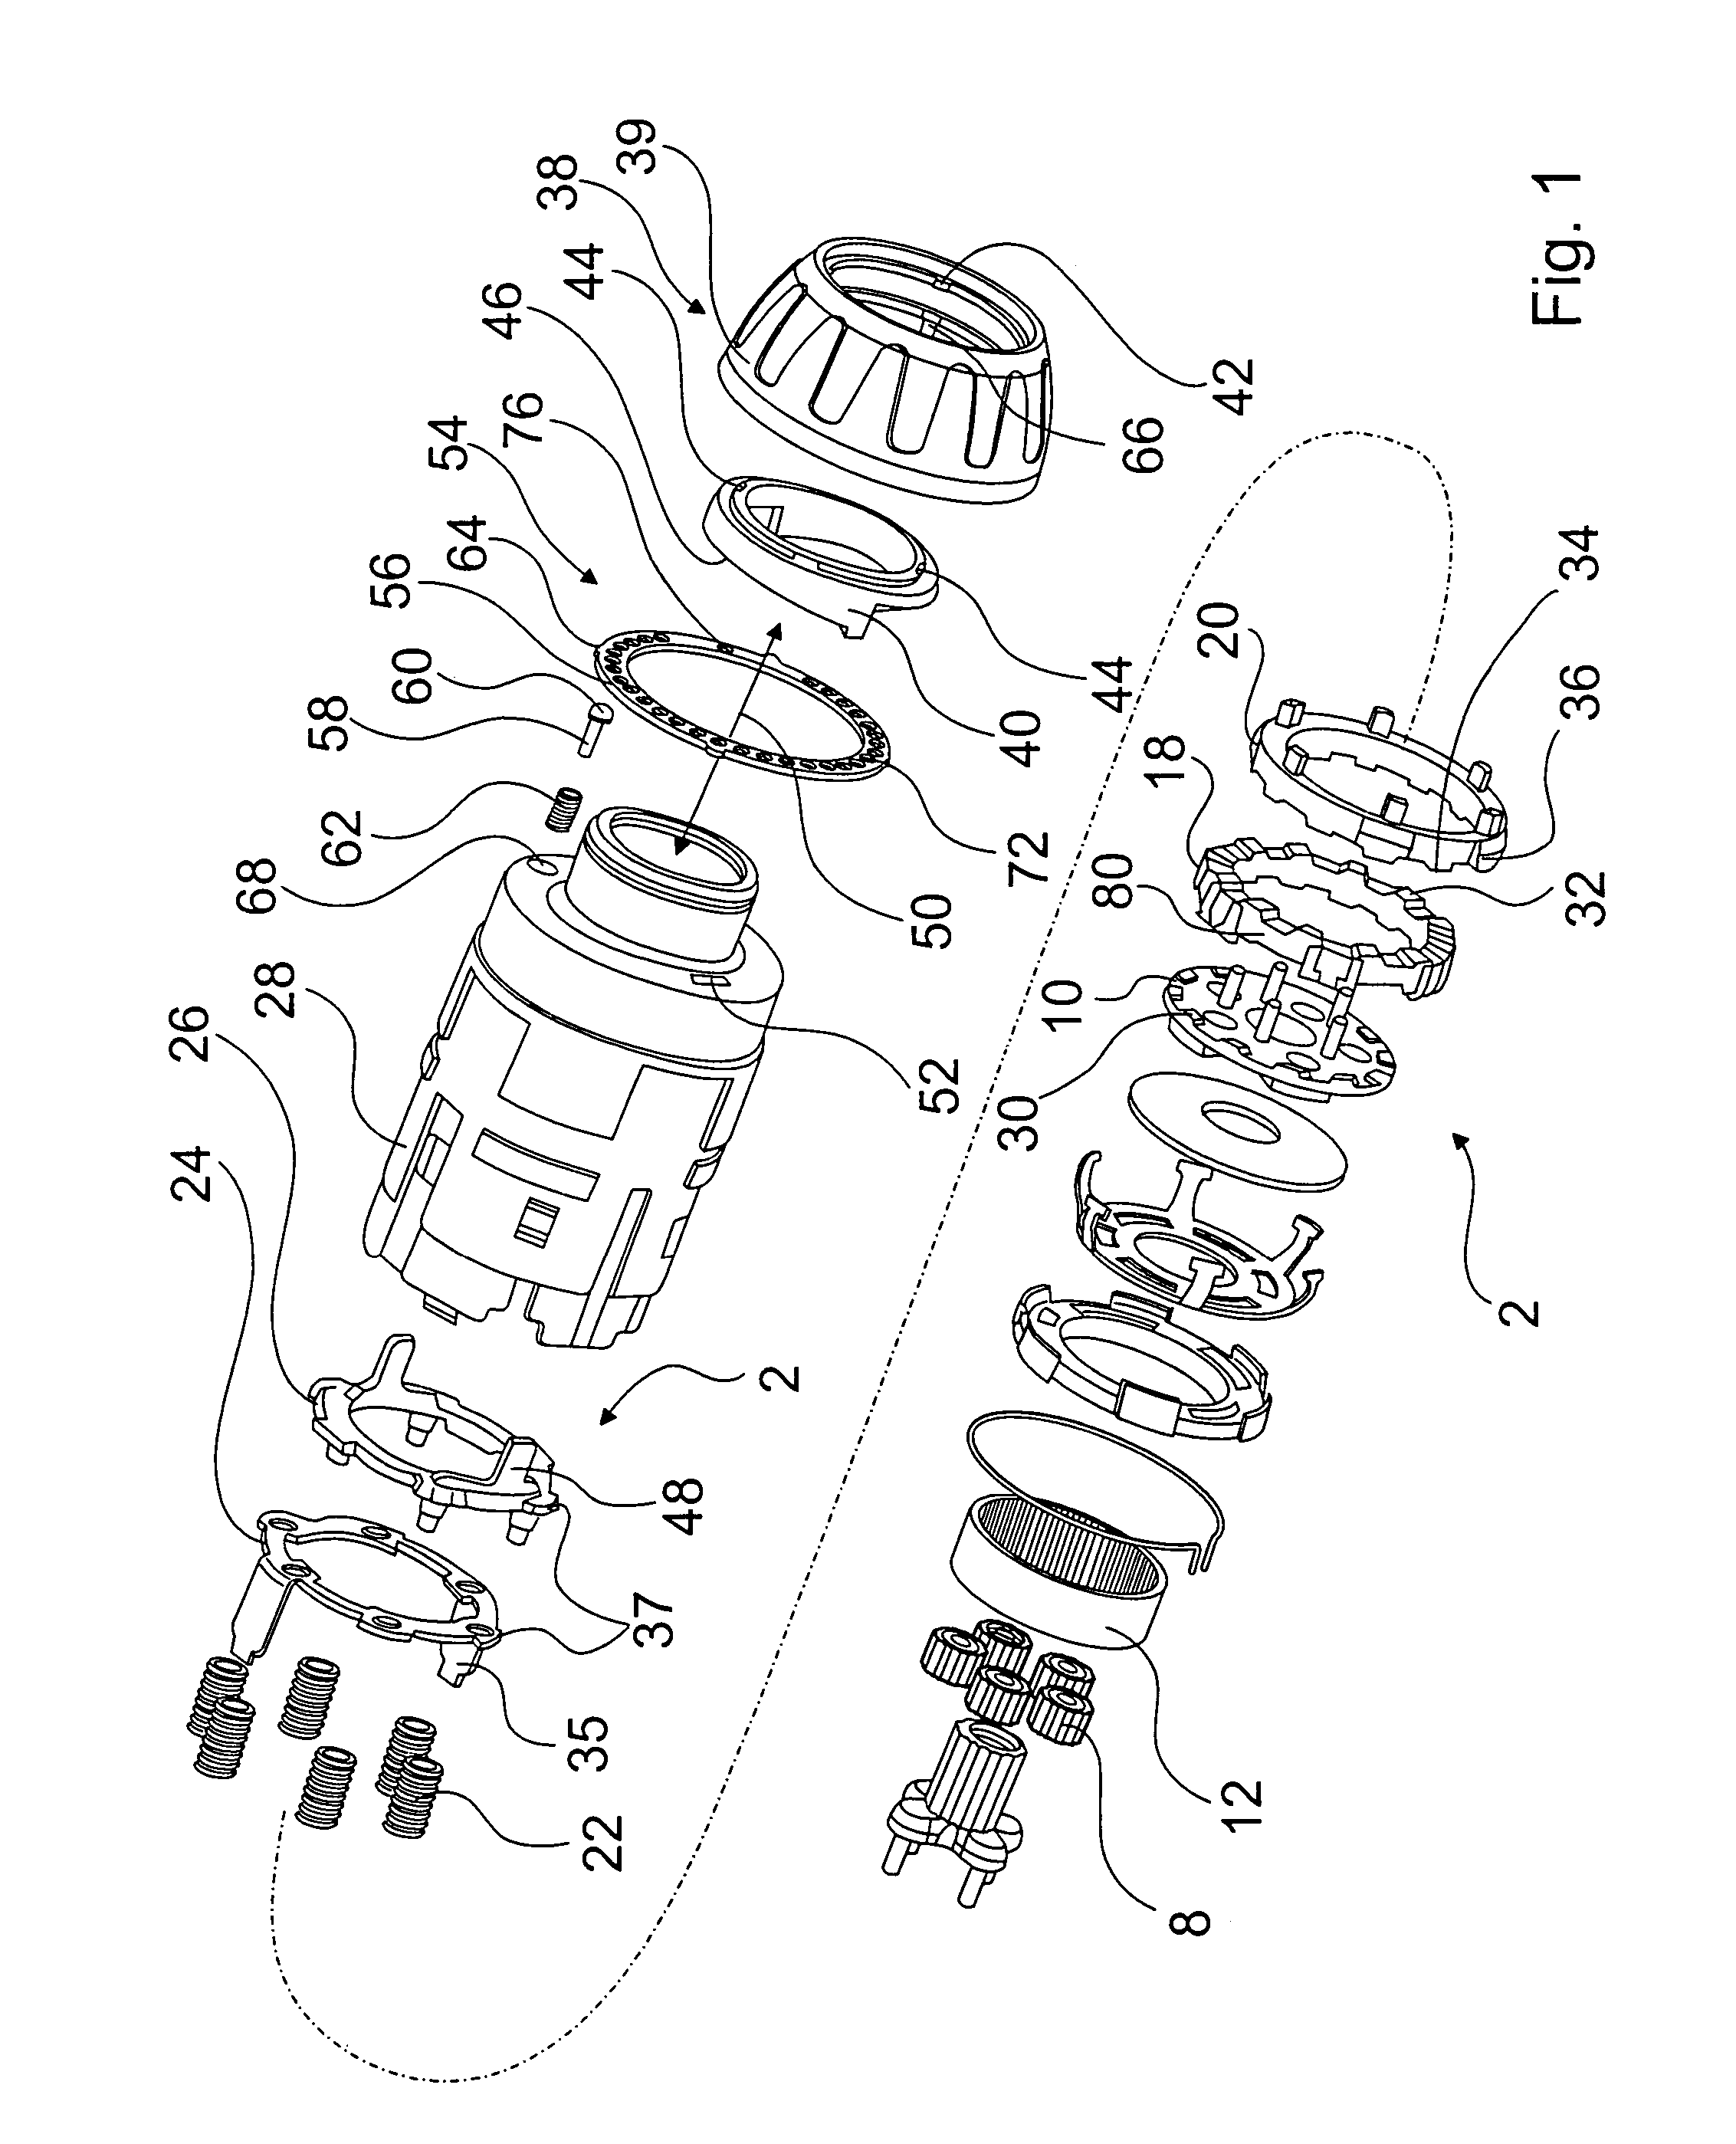 Hand-held power tool with a torque-limiting unit